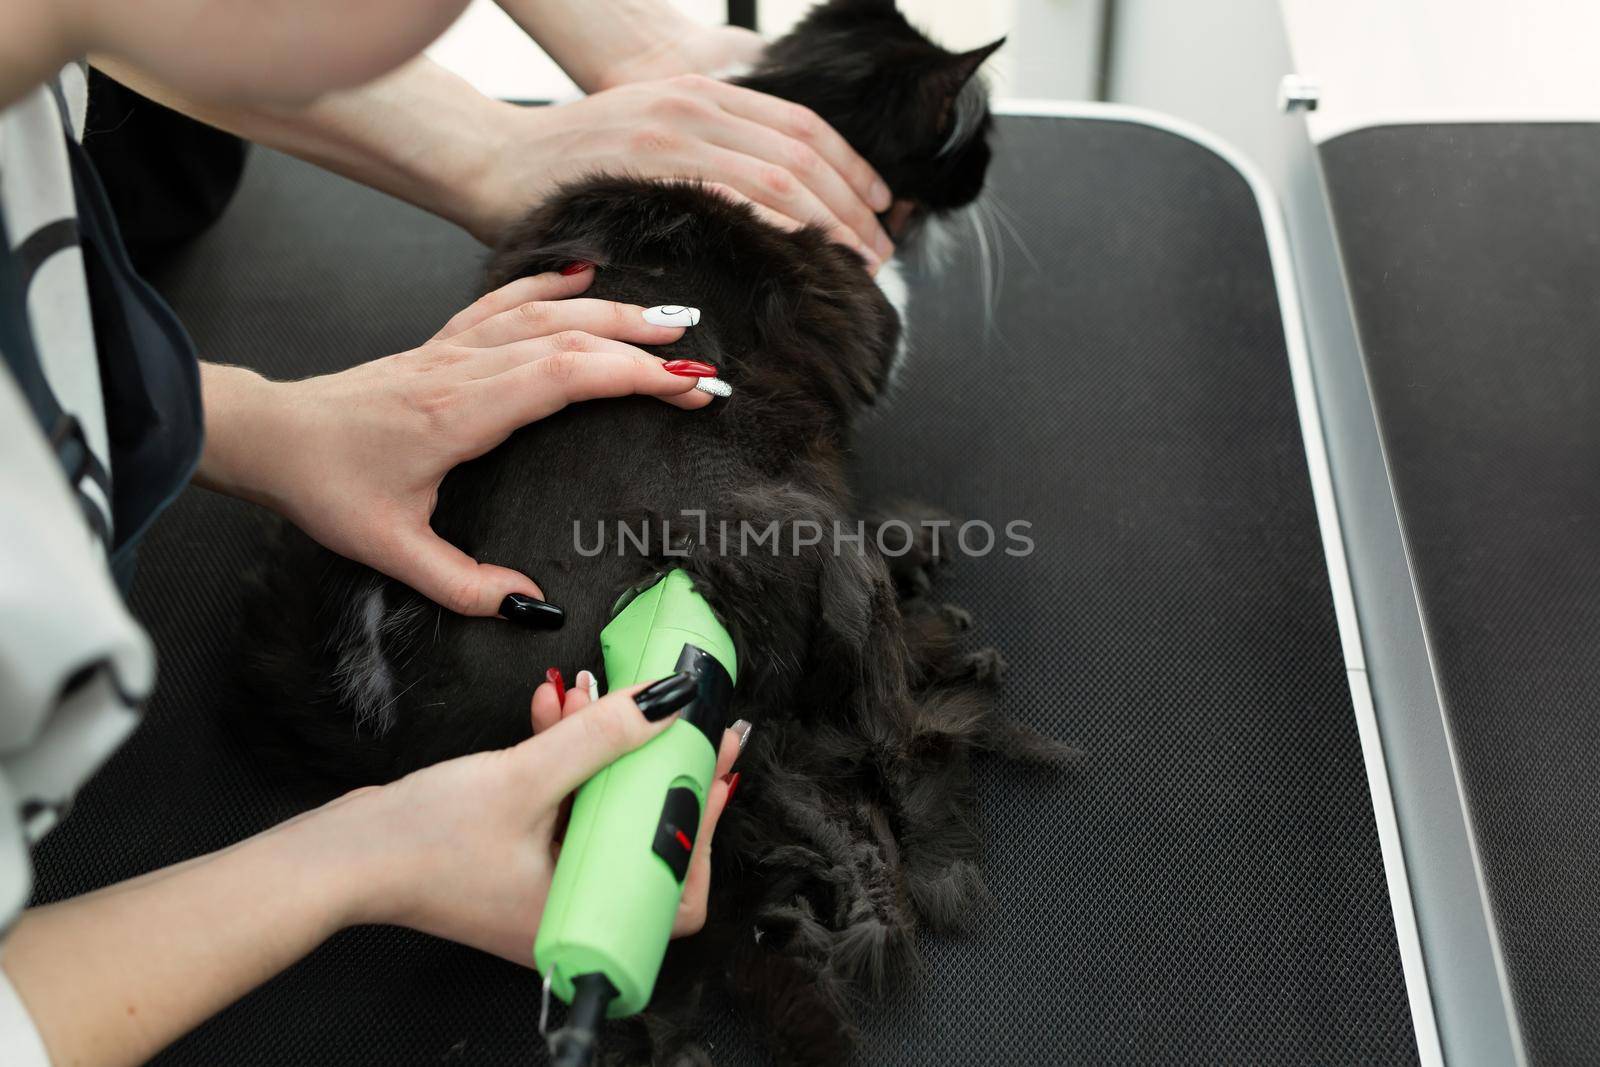 Grooming master cuts and shaves a cat, cares for a cat. The vet uses an electric shaving machine for the cat. The man helps and holds the cat's head.